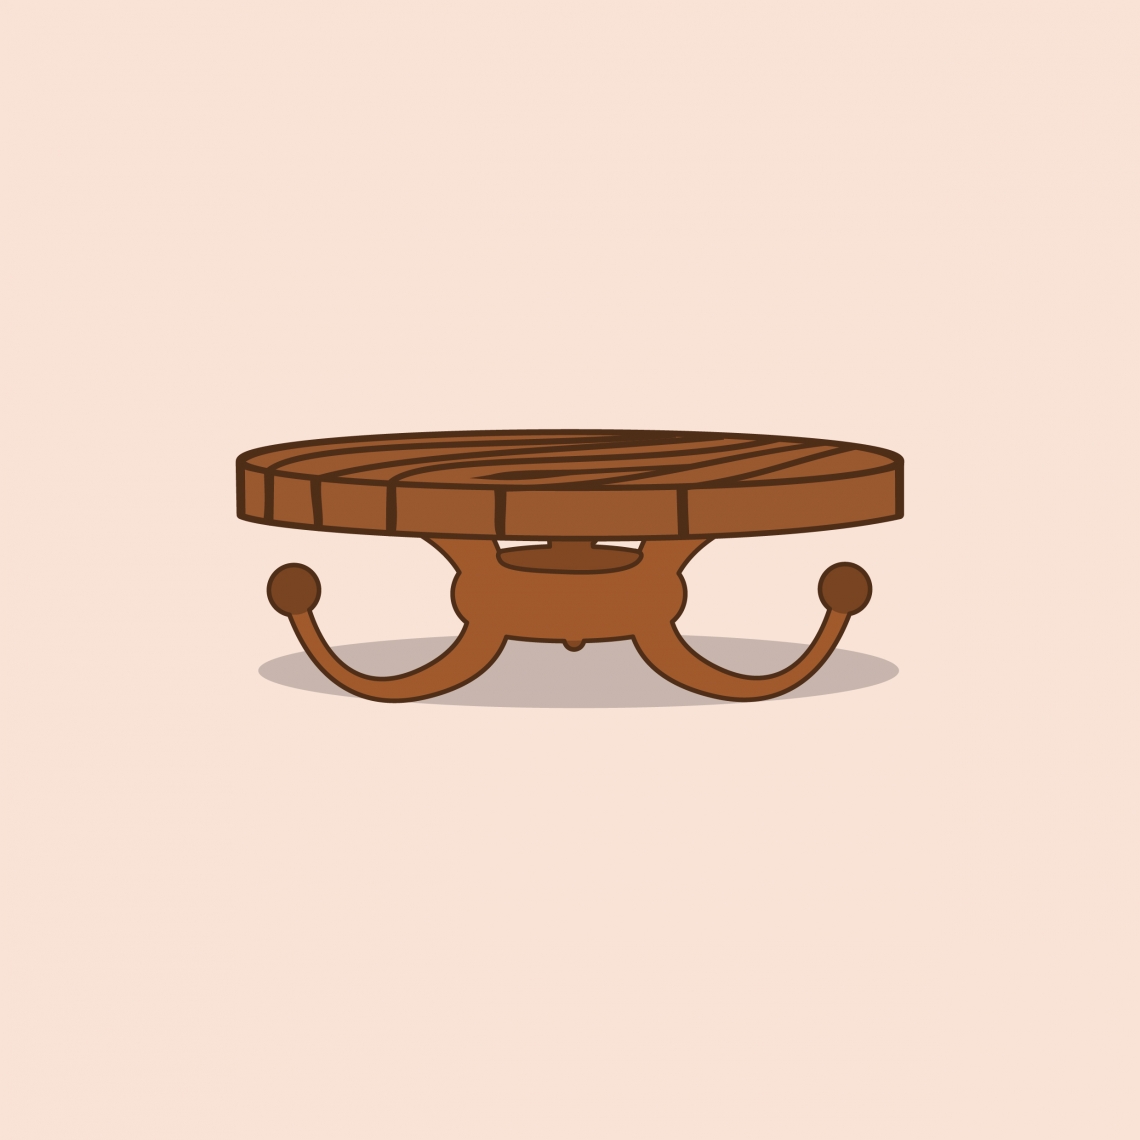 Rounded table vector 